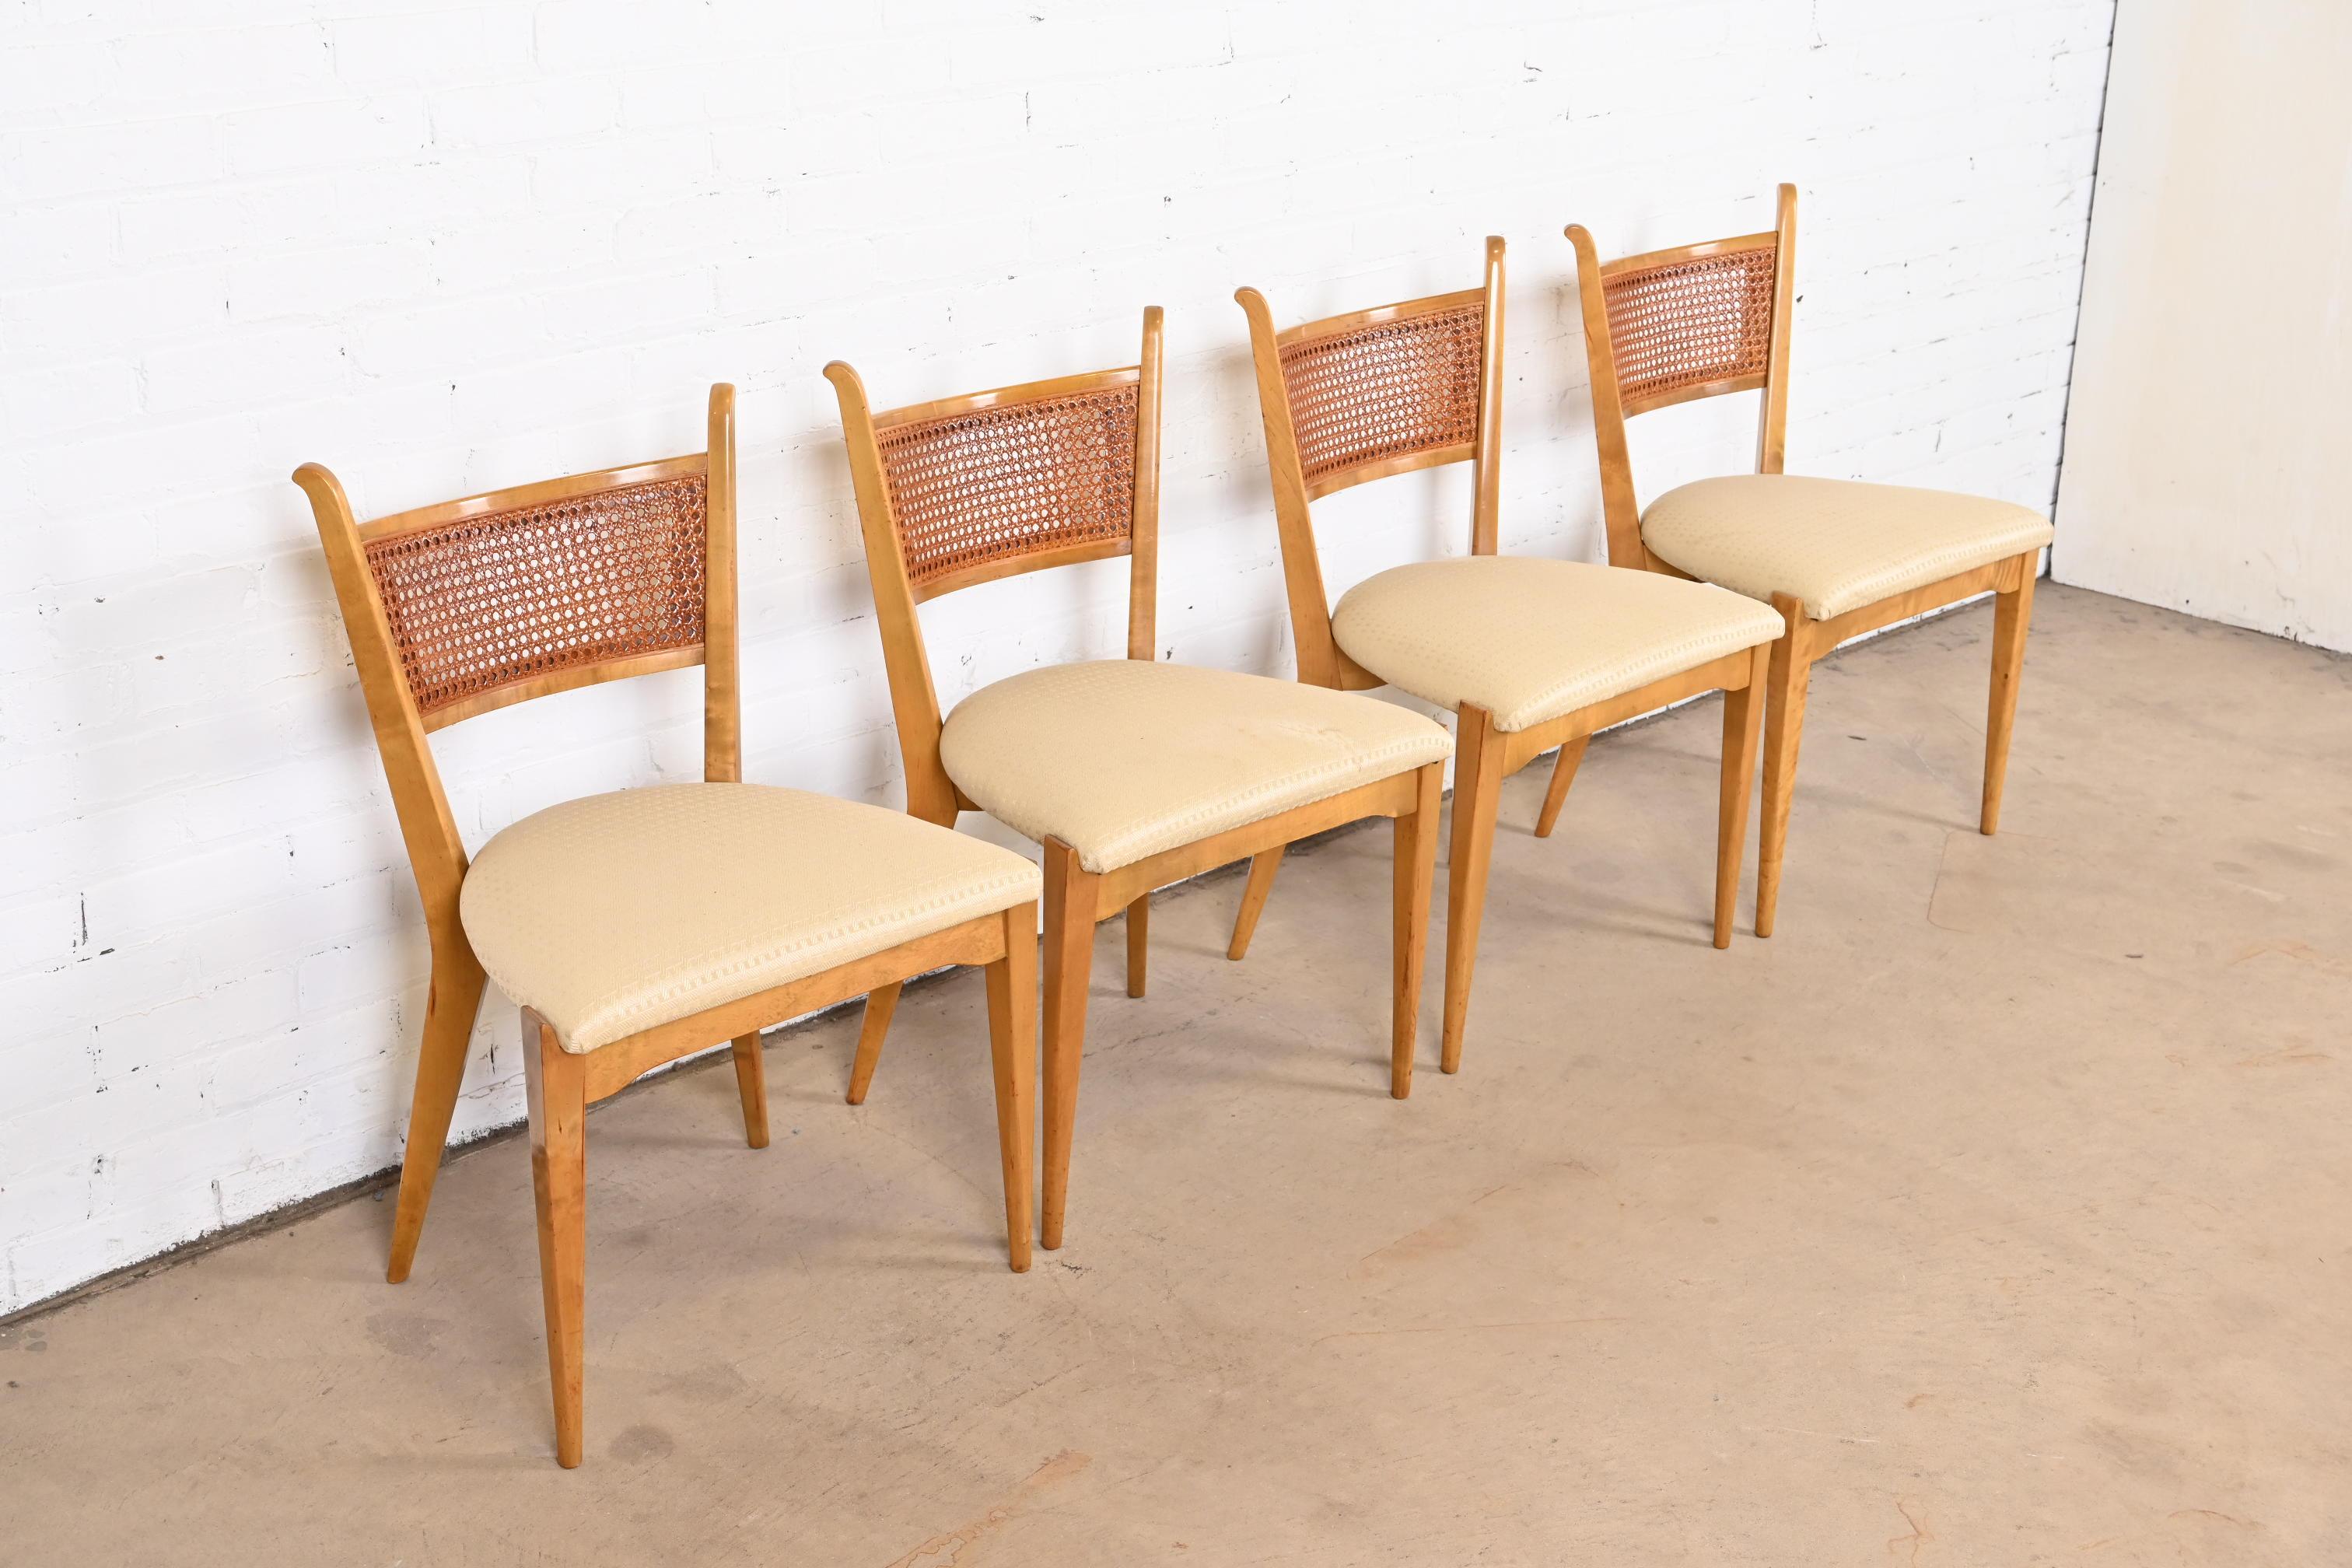 Upholstery Edmond Spence Swedish Modern Sculpted Maple and Cane Dining Chairs, Set of Four For Sale